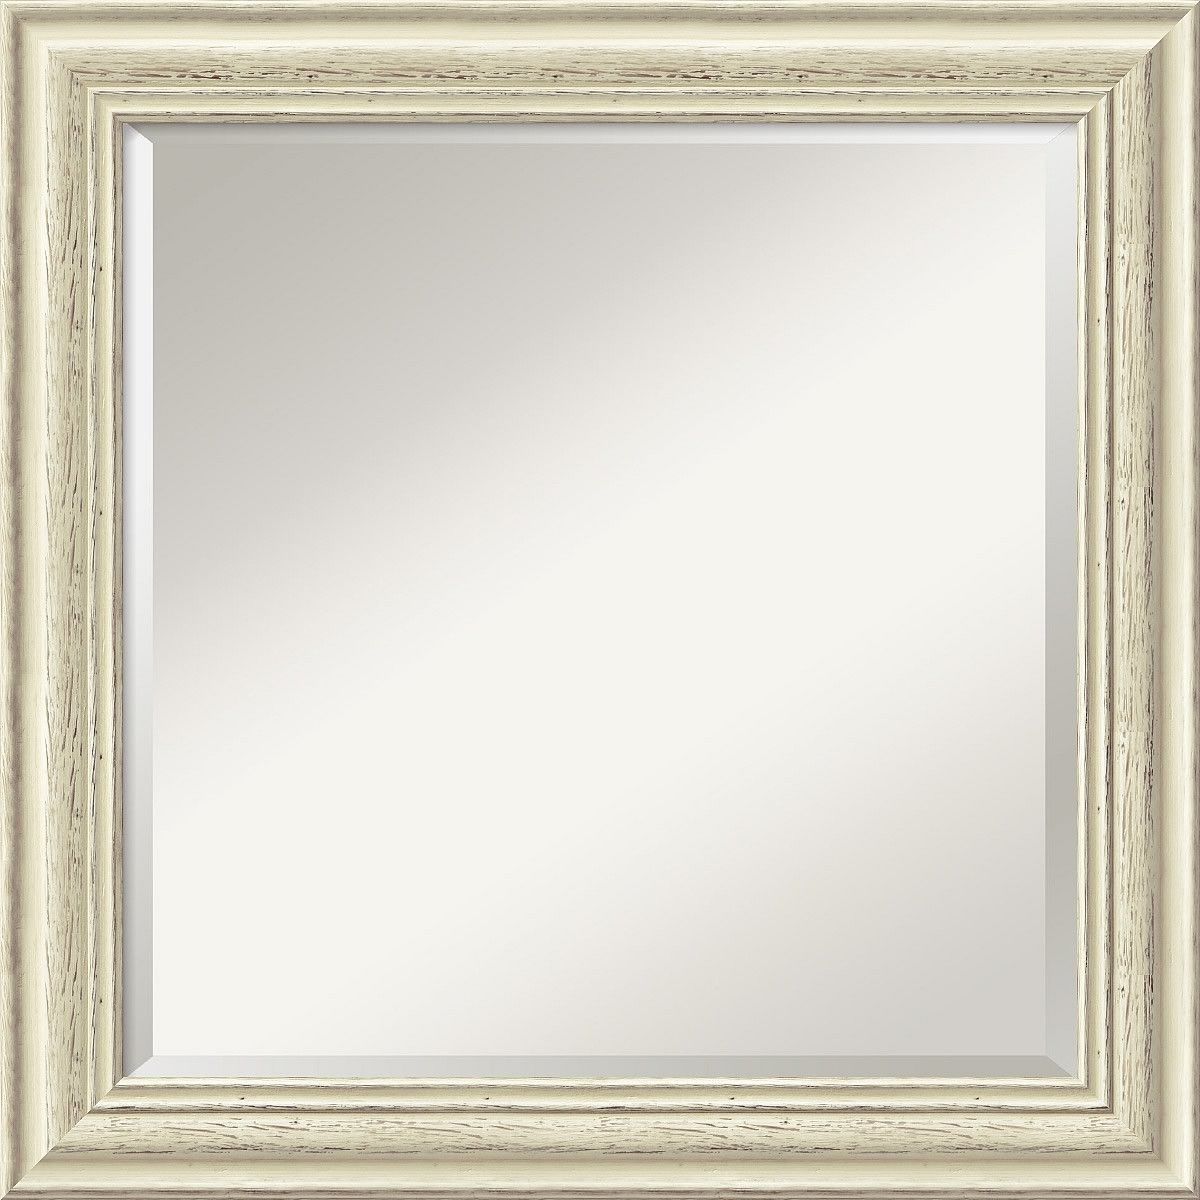 25"h X 25"w Country Whitewash Square Mirror Framed Mirror | Framed Pertaining To White Square Wall Mirrors (View 15 of 15)